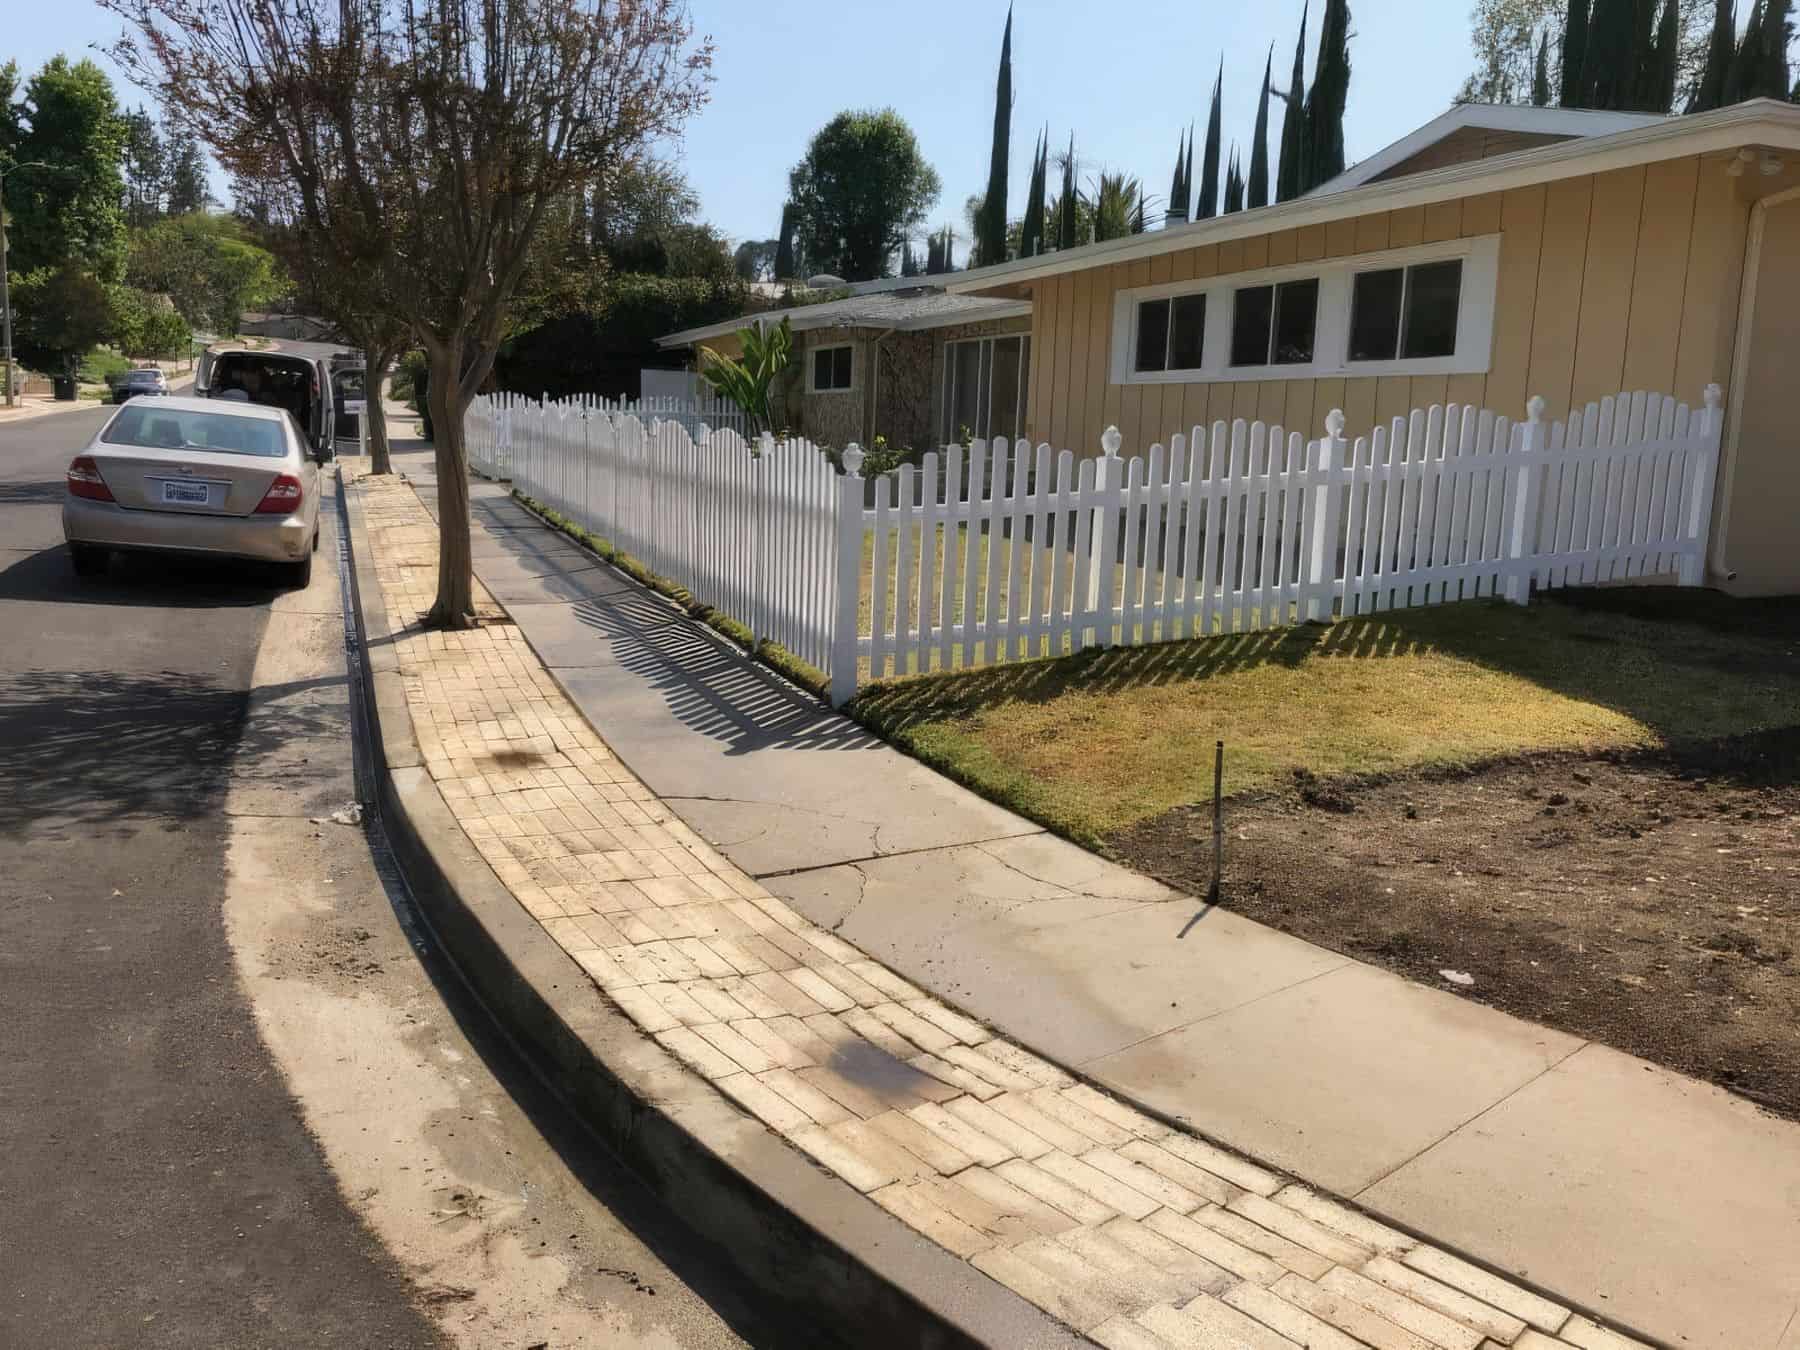 Vinyl dog ear picket fence surrounding suburban house with trees in background, next to a concrete sidewalk.